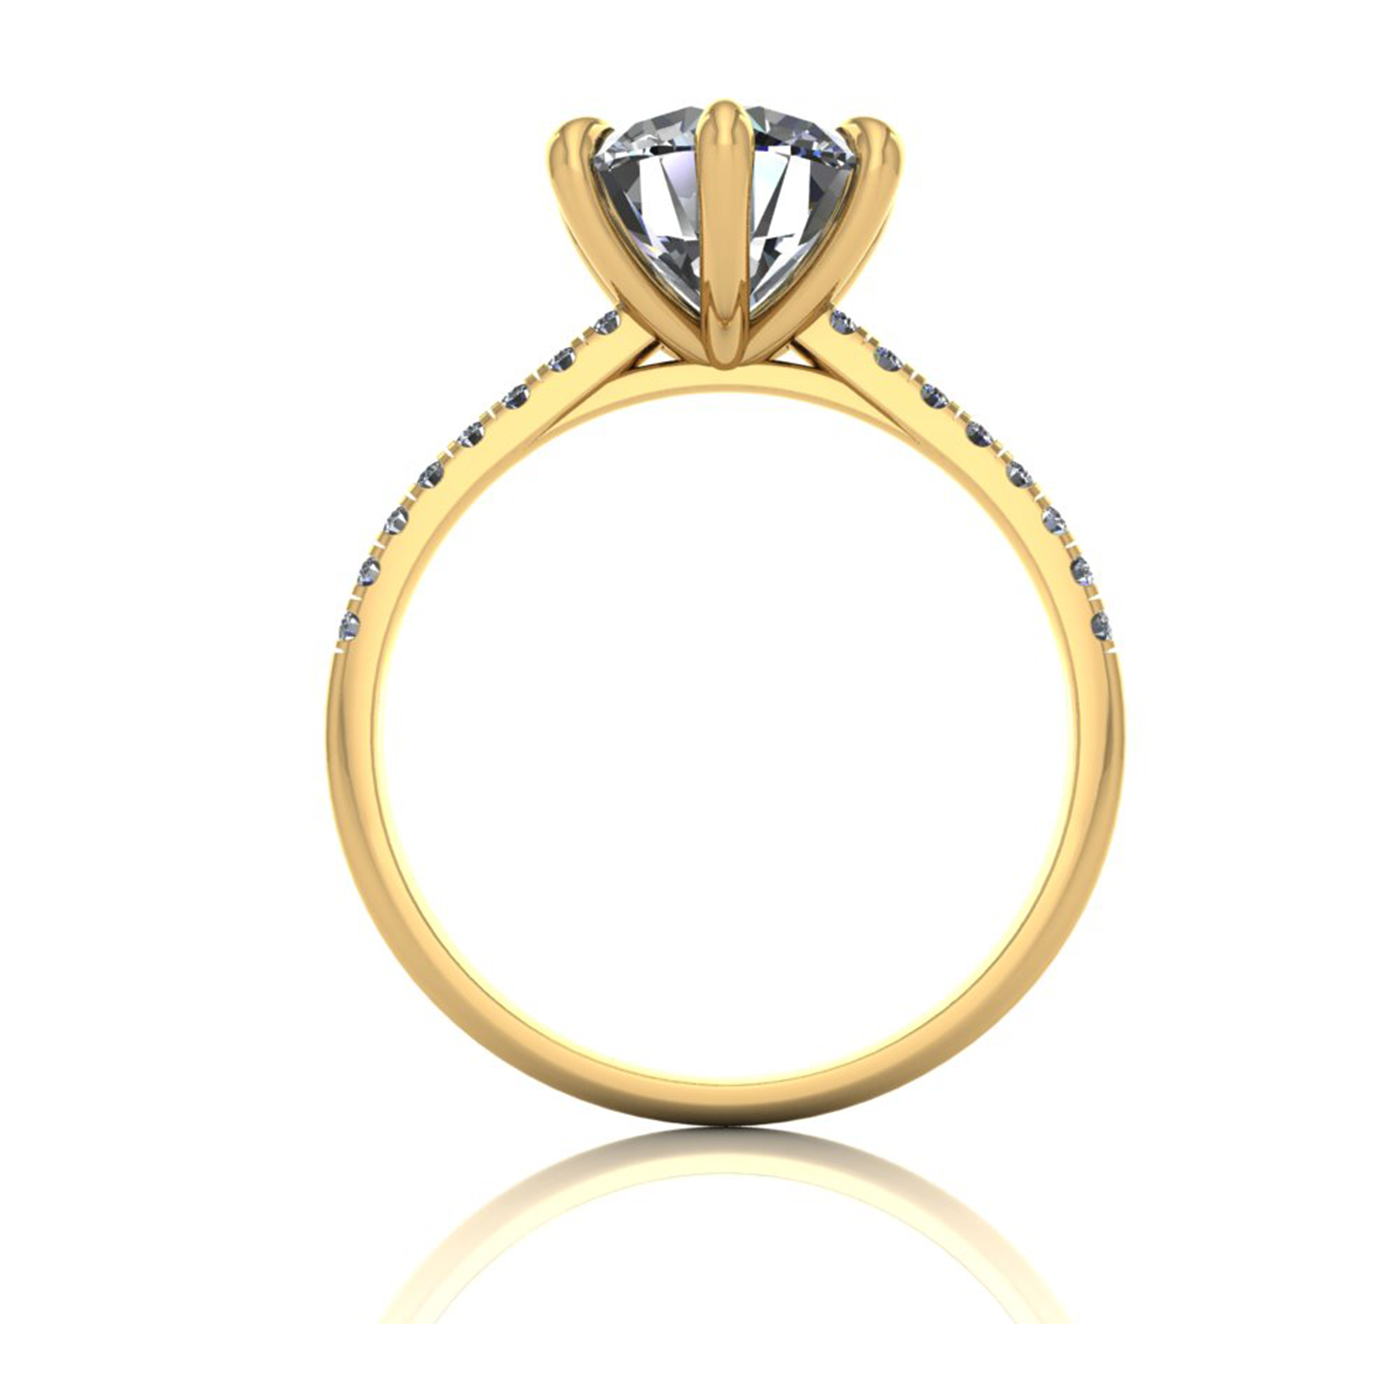 18k yellow gold 2,00 ct 6 prongs round cut diamond engagement ring with whisper thin pavÉ set band